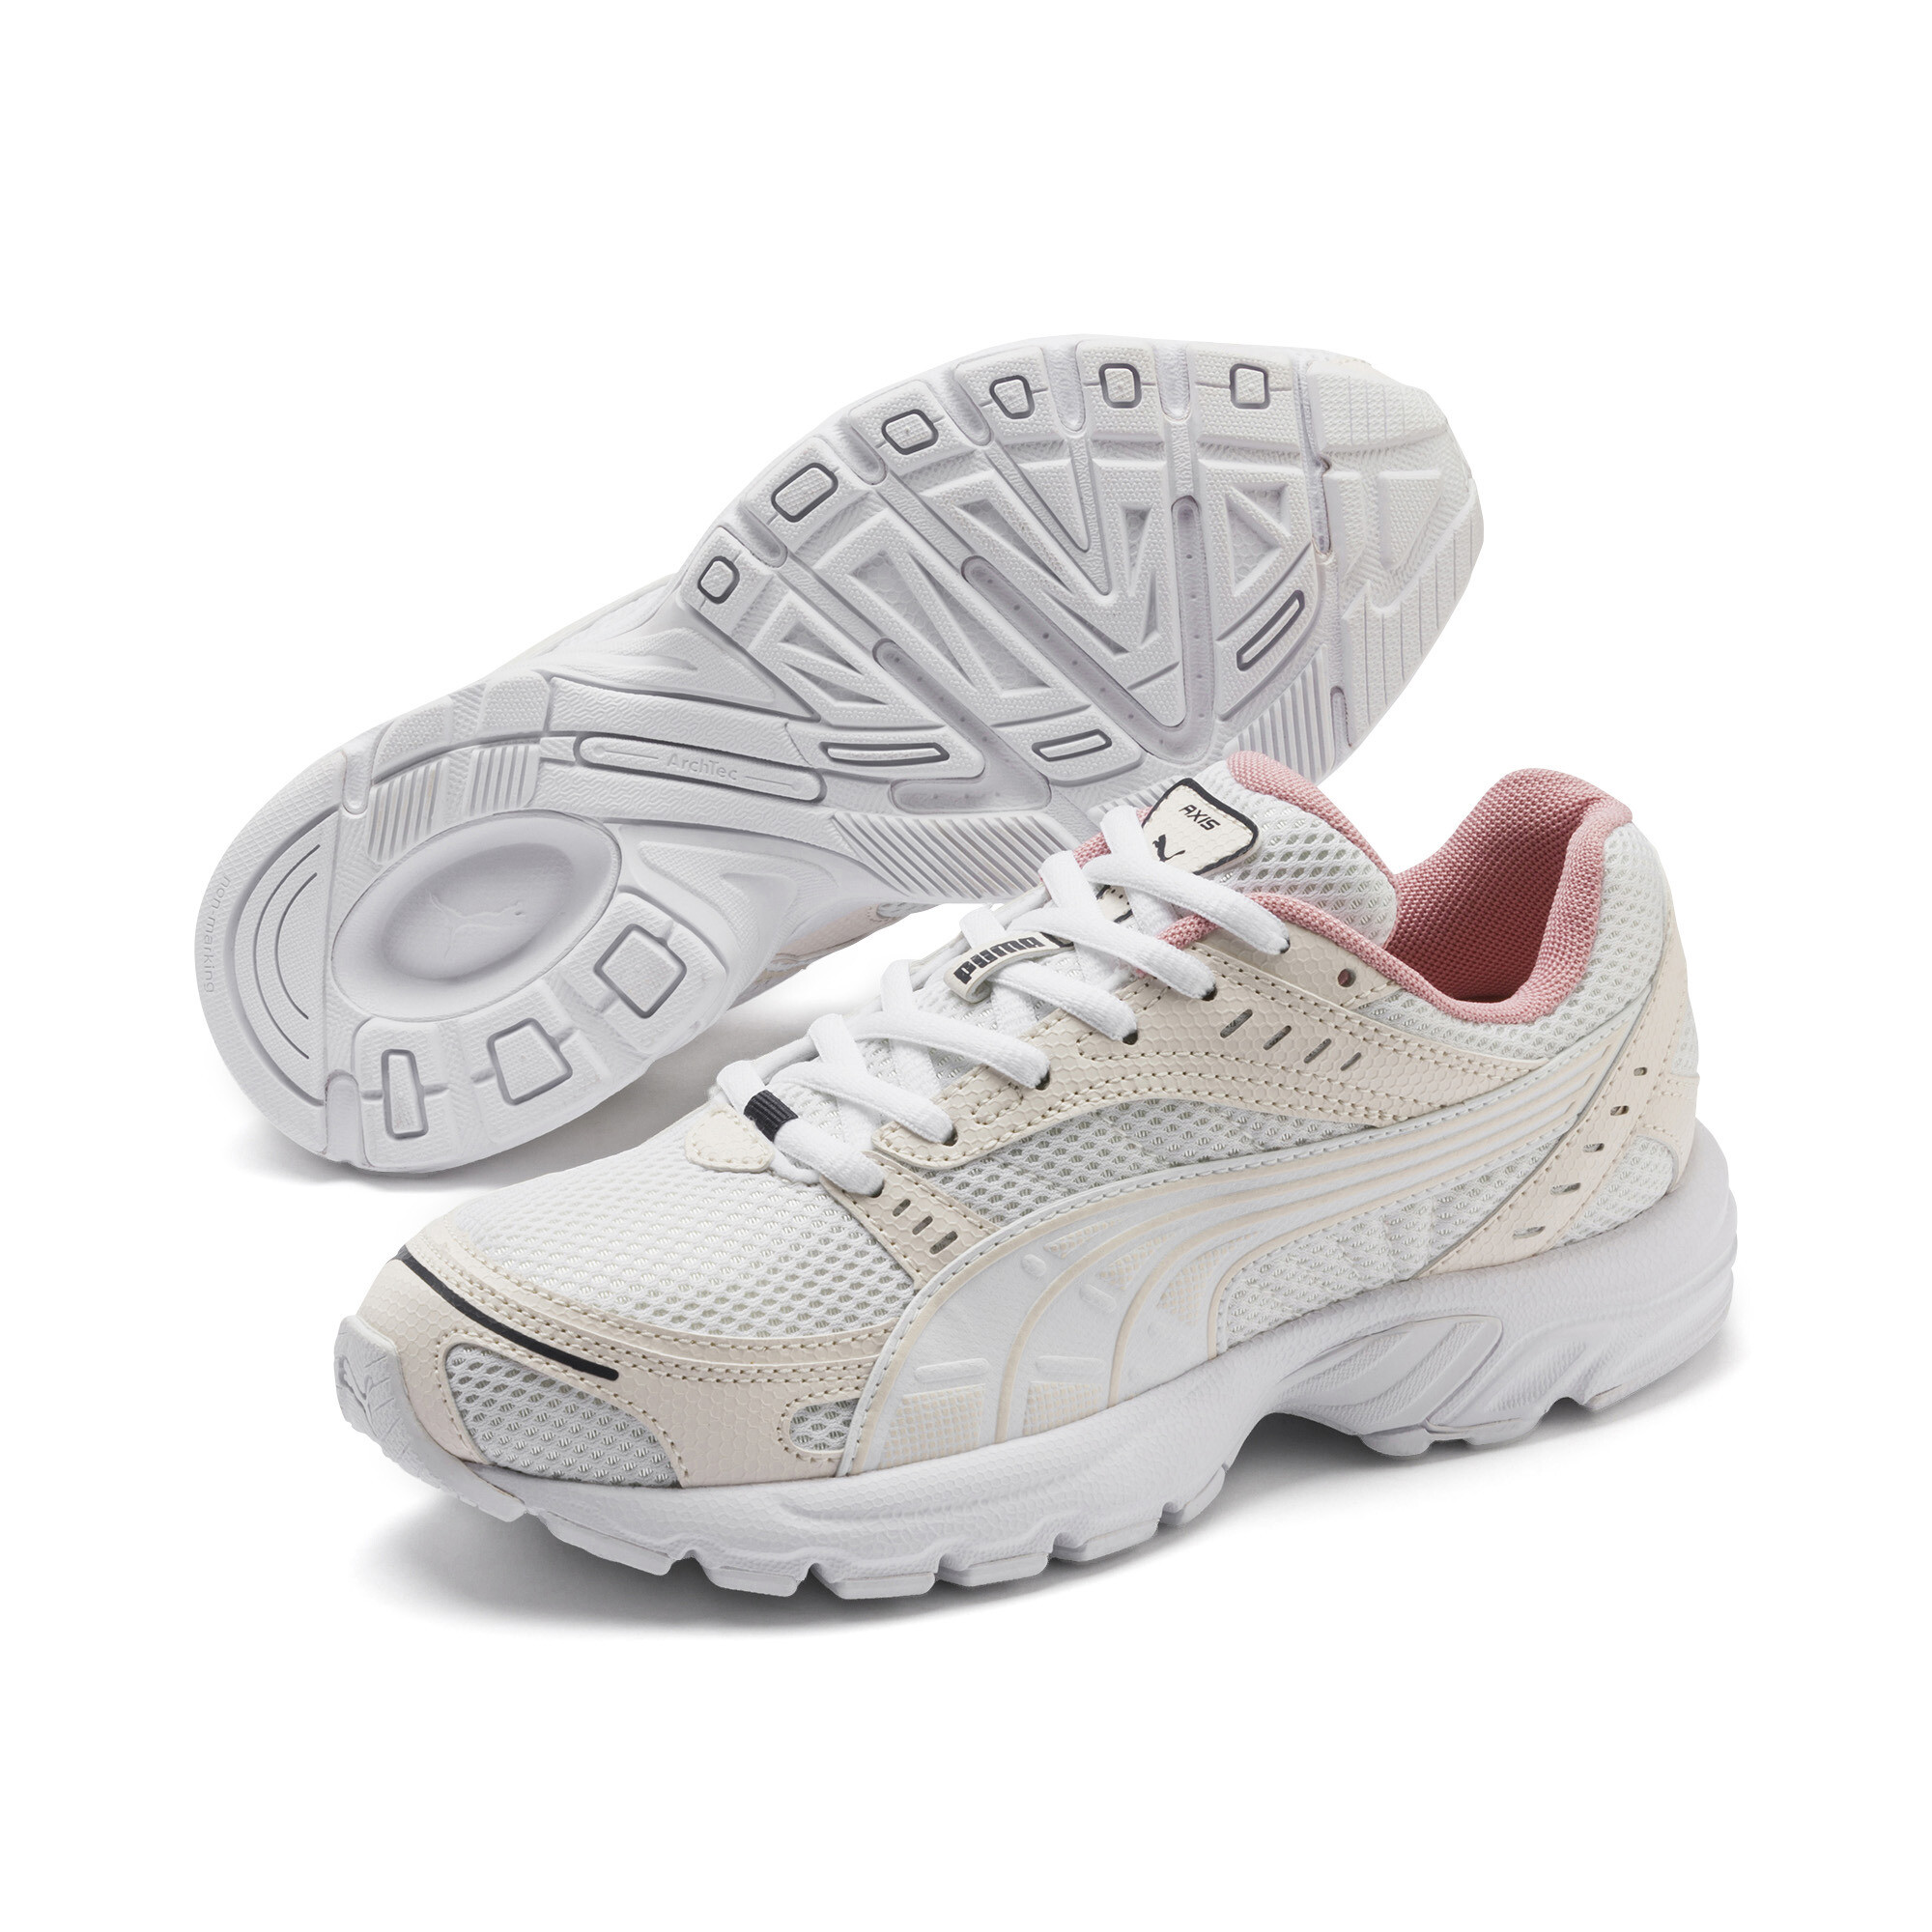 Puma Axis Trainers, White, Size 35.5, Shoes